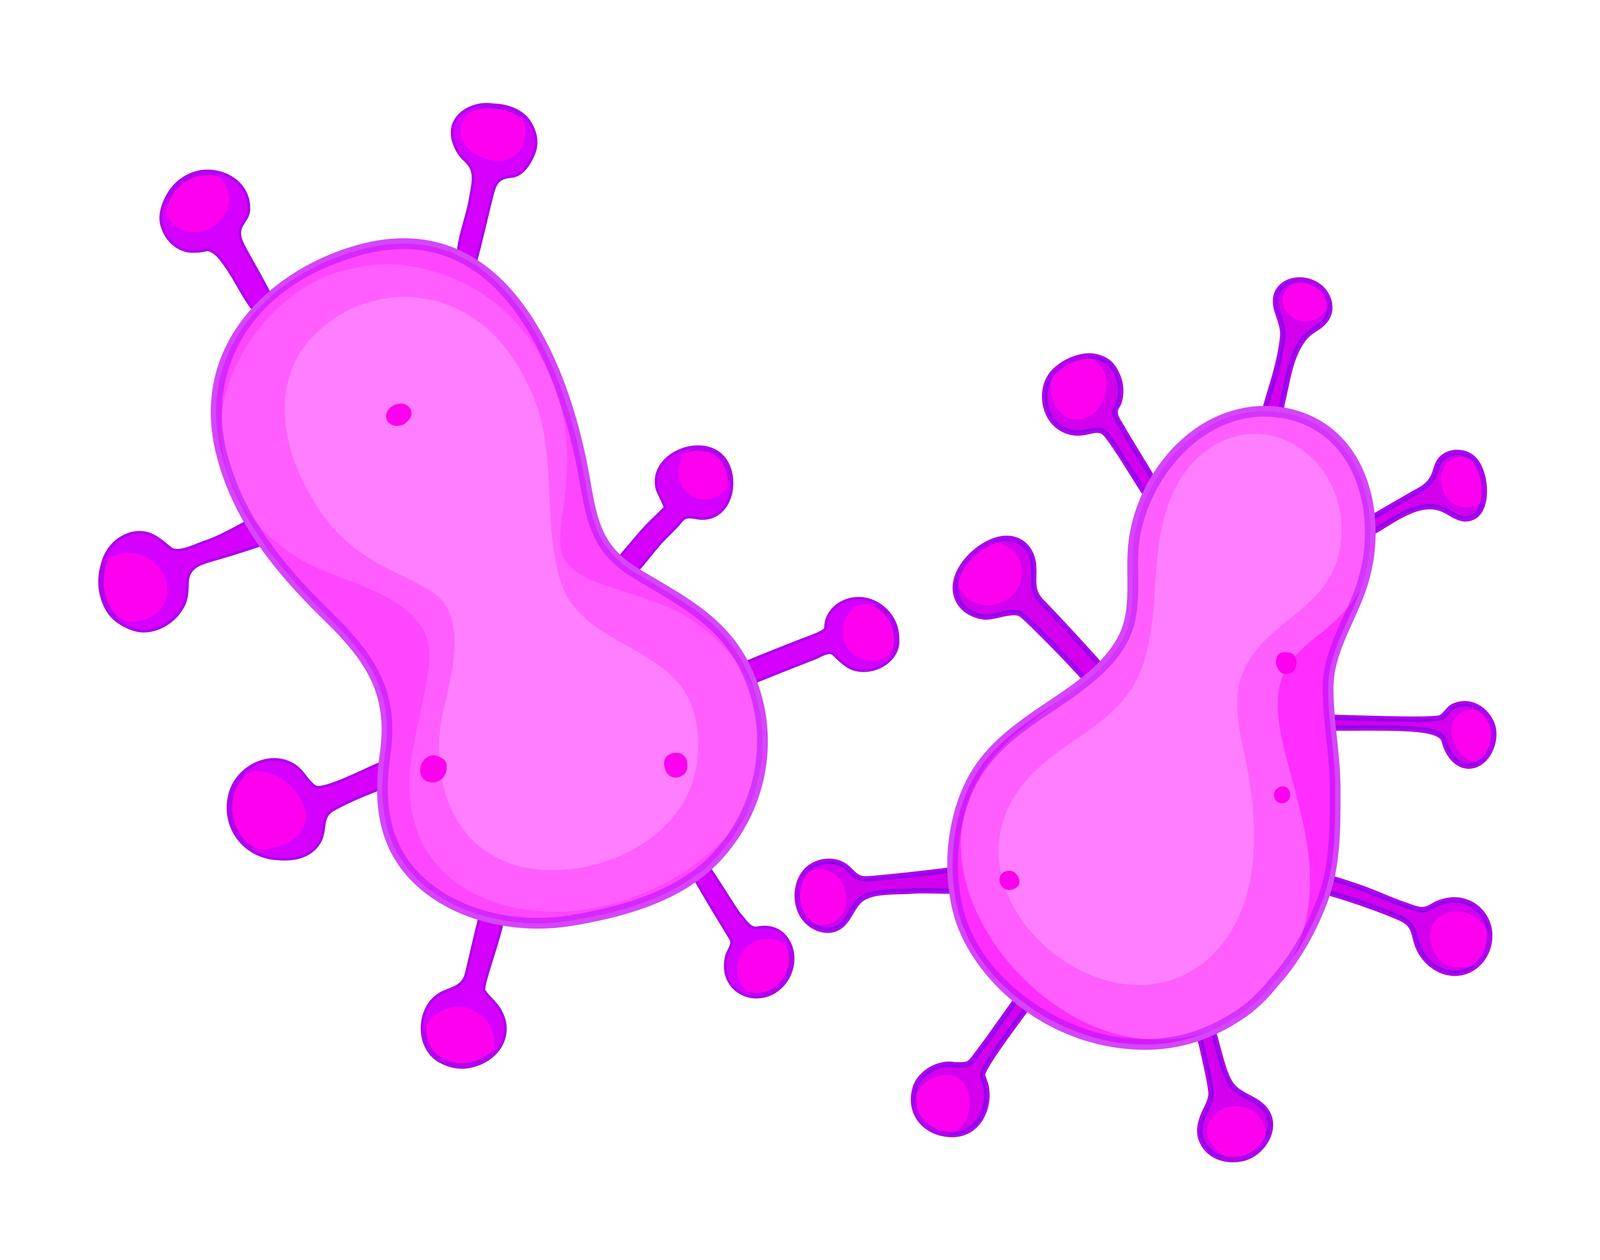 Bacteria in round shape illustration